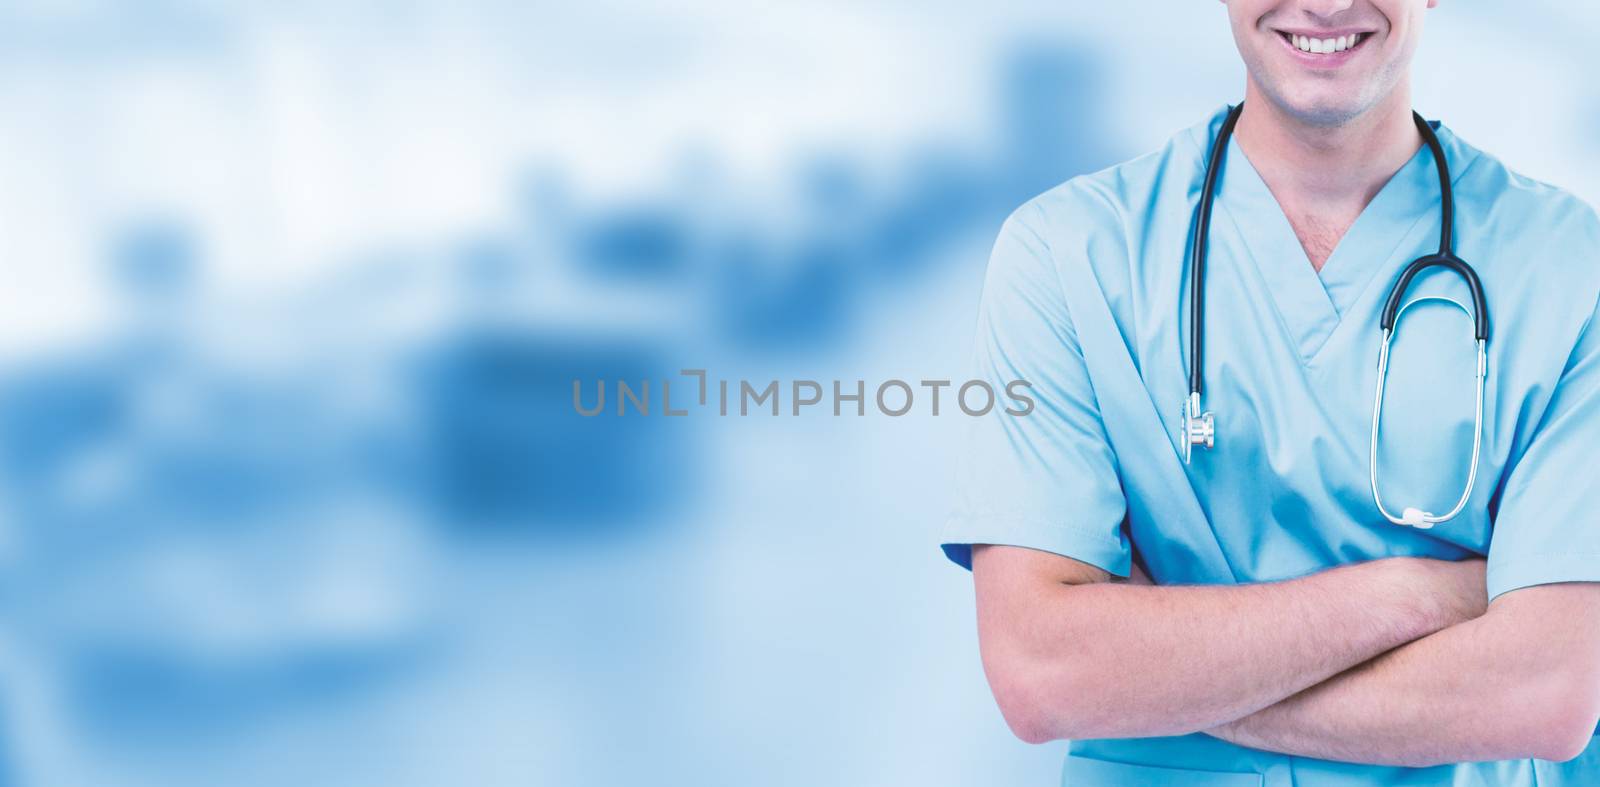 Portrait of male surgeon standing arms crossed against dental equipment